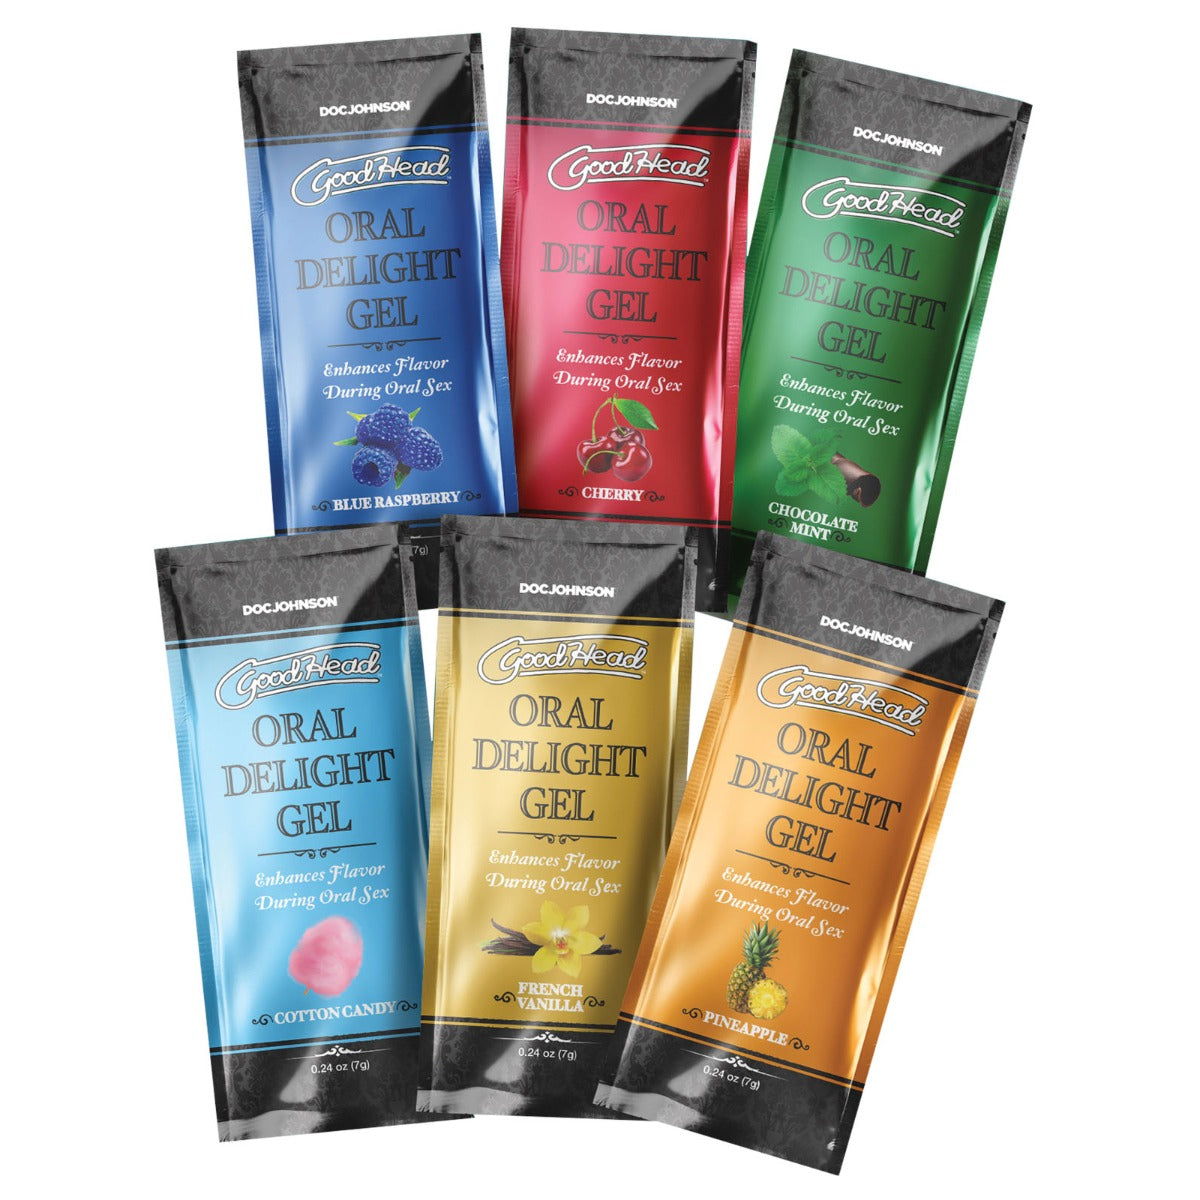 GoodHead | Oral Delight Gel 6 Pack - Blue Raspberry, Cherry Chocolate, Mint, Cotton Candy, French Vanilla & Pineapple